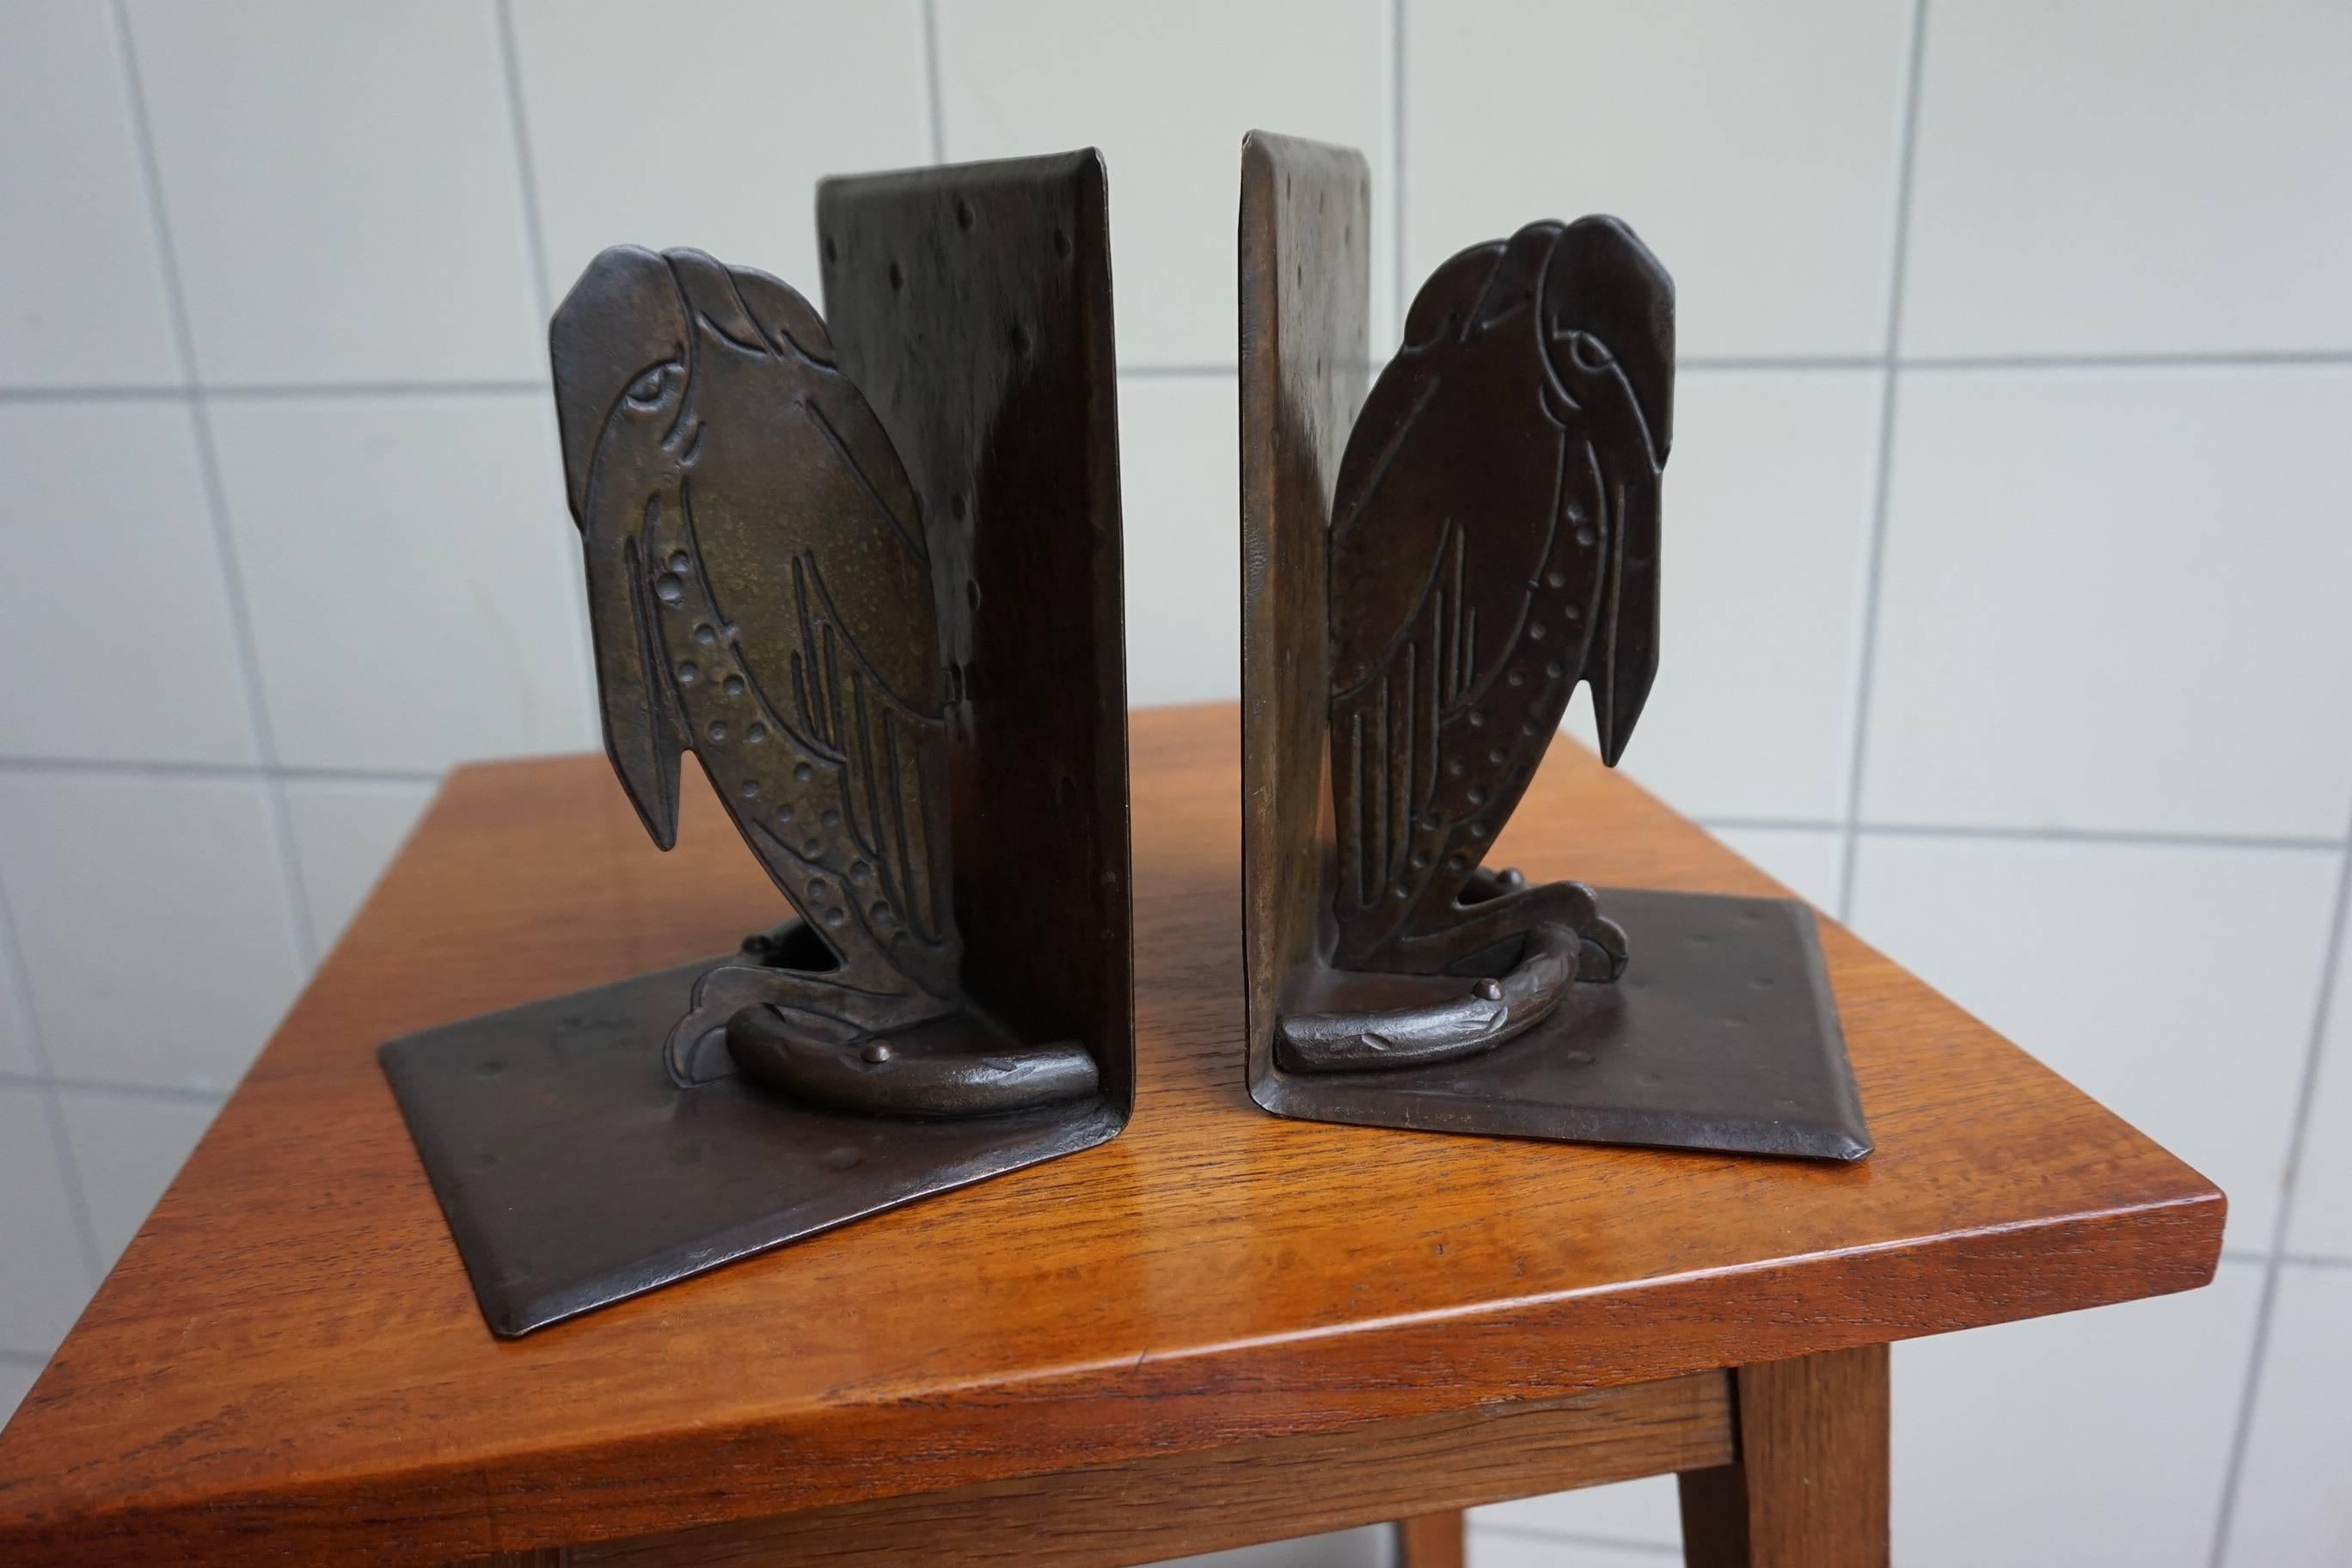 Rare animal bookends by Hugo bergere of Germany.

It is because of their appearance rather than because of their eating behavior (as scavengers) that maraboos are also known to be called 'the undertaker birds'. Looking at these stylized Arts and